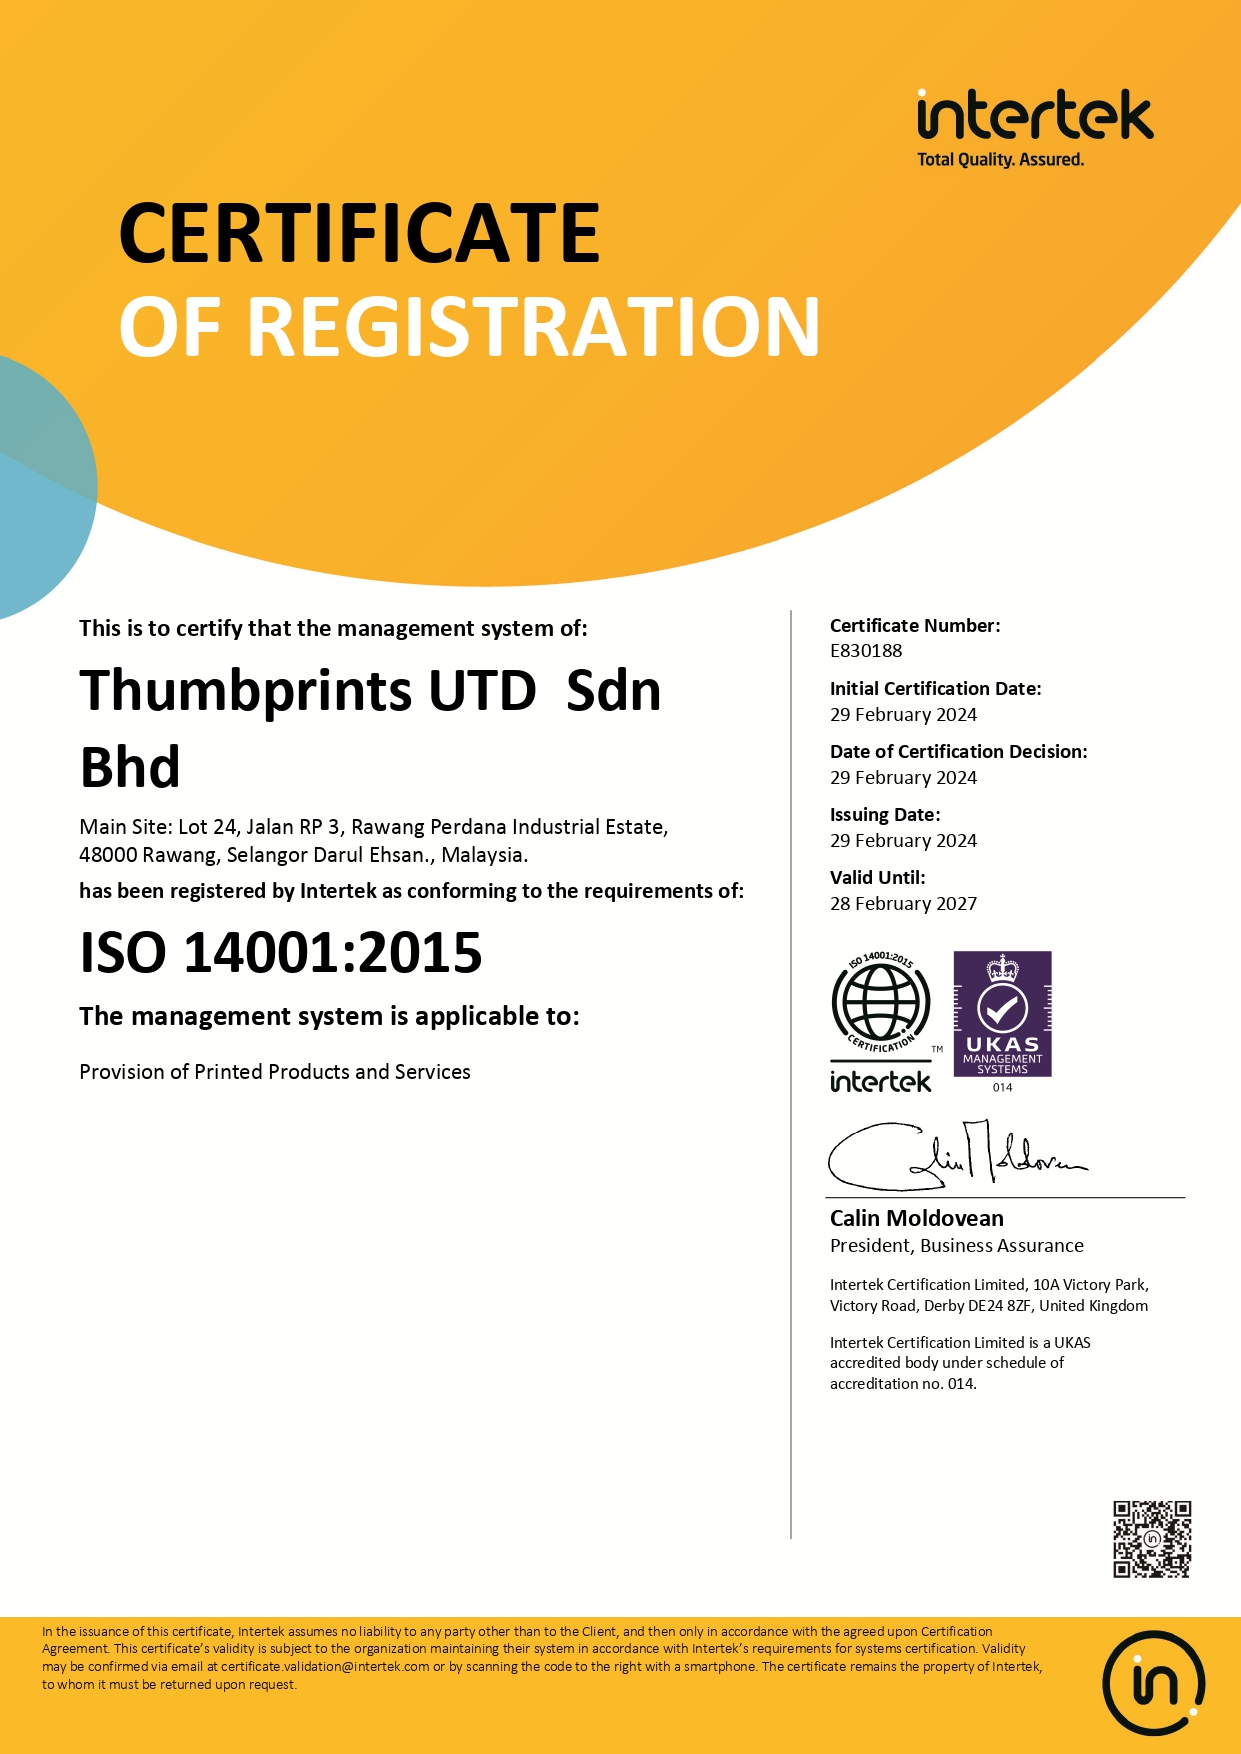 ISO 14001: 2015 (29.02.2024-28.02.2027)